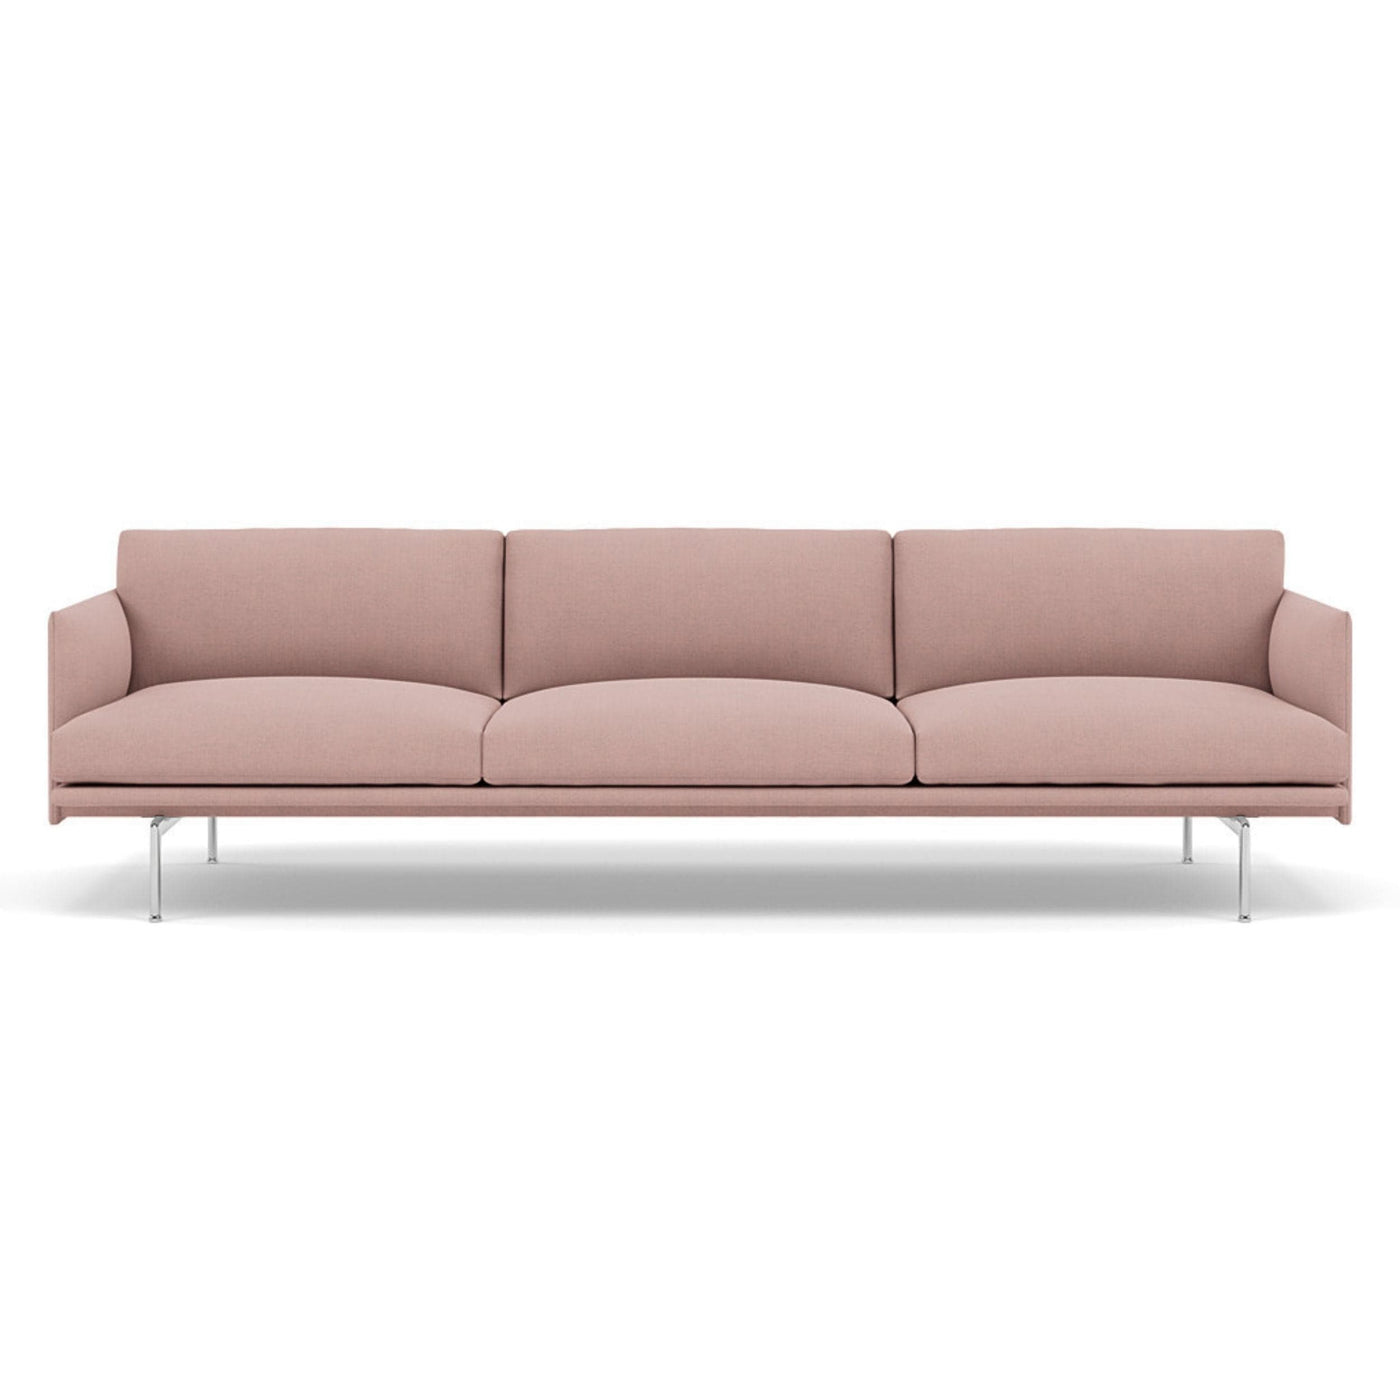 muuto outline 3.5 seater sofa in fiord 551 and polished aluminium legs. Made to order from someday designs. #colour_fiord-551